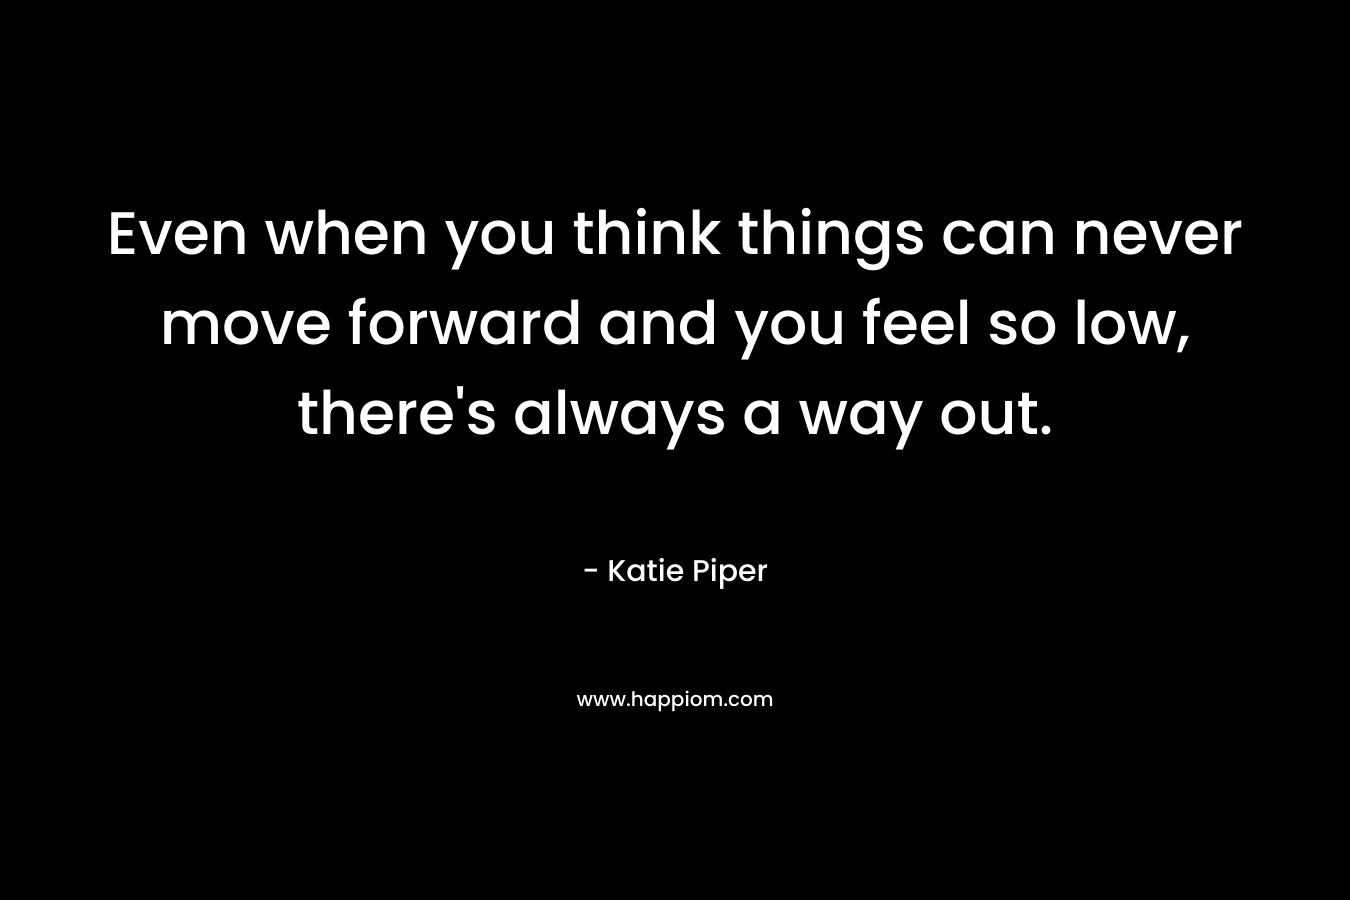 Even when you think things can never move forward and you feel so low, there’s always a way out. – Katie Piper